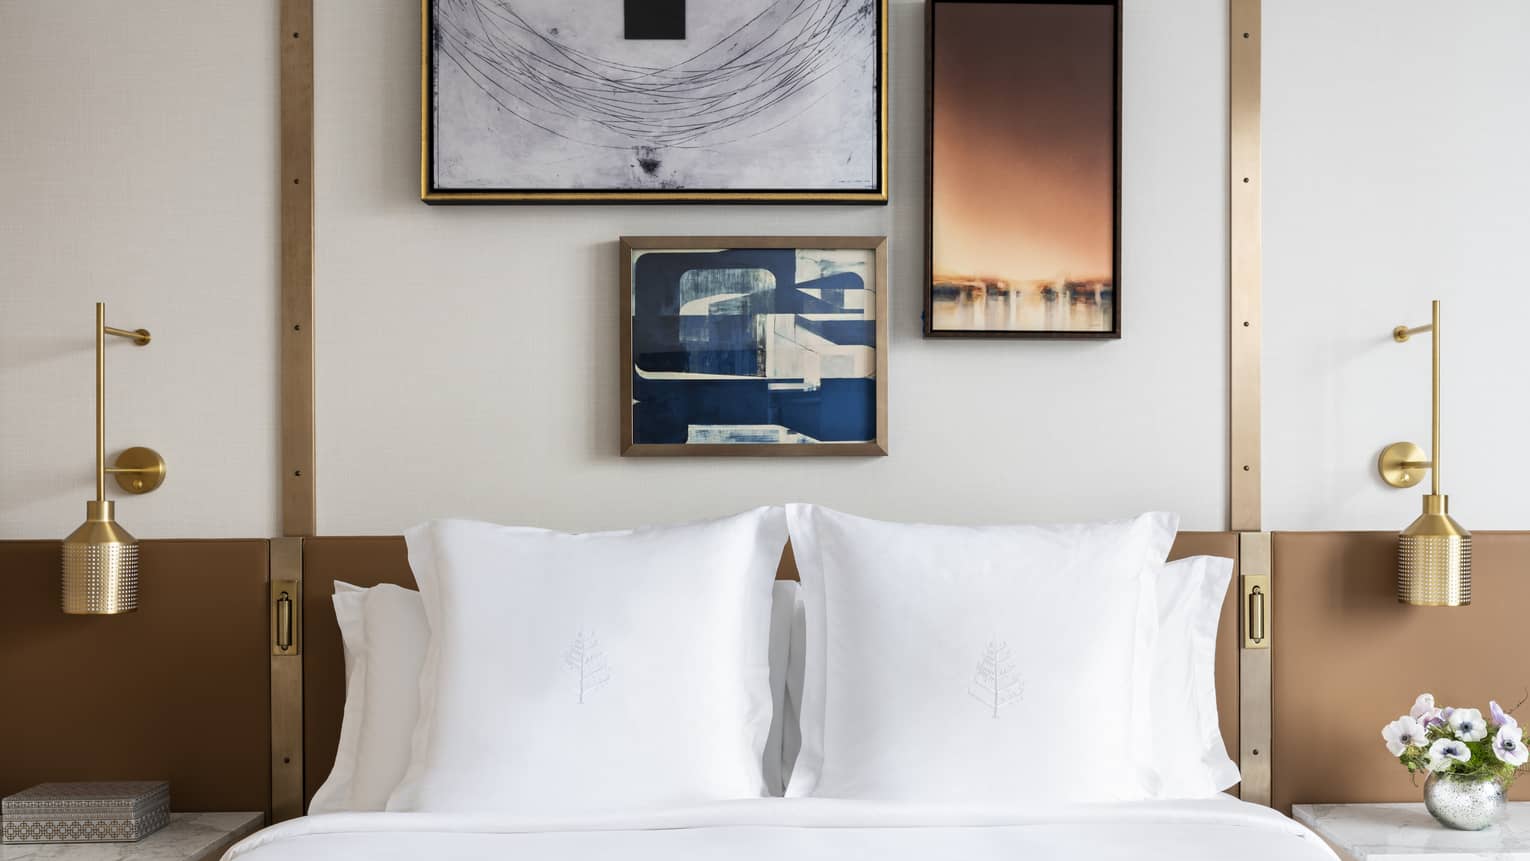 Bed with white sheets and shams, three framed artwork on wall overhead